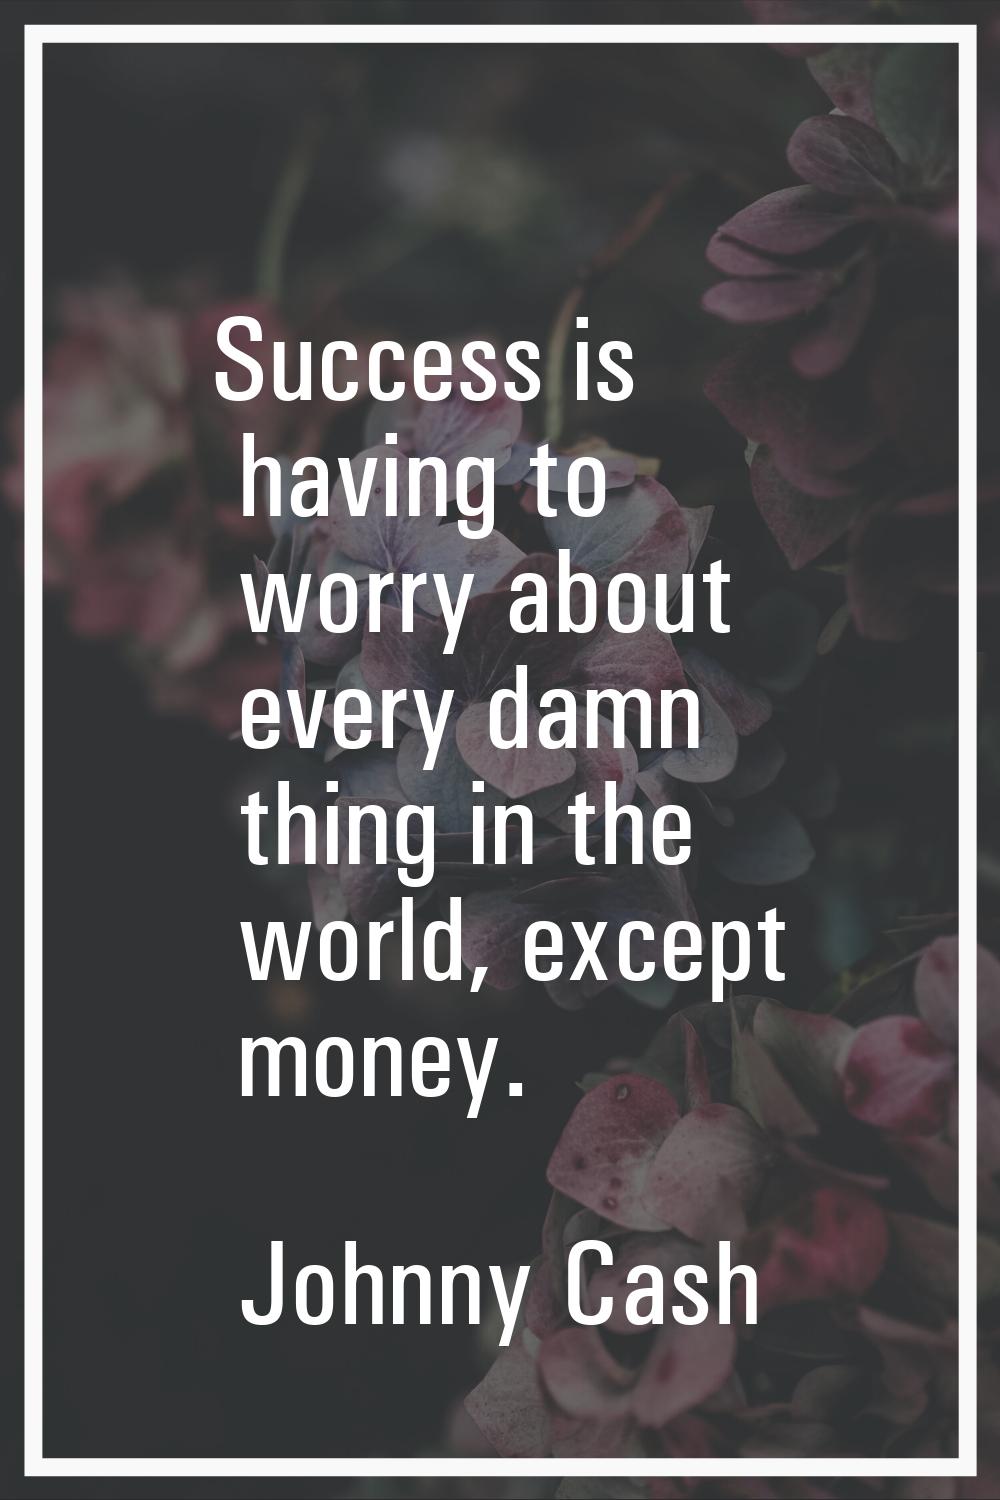 Success is having to worry about every damn thing in the world, except money.